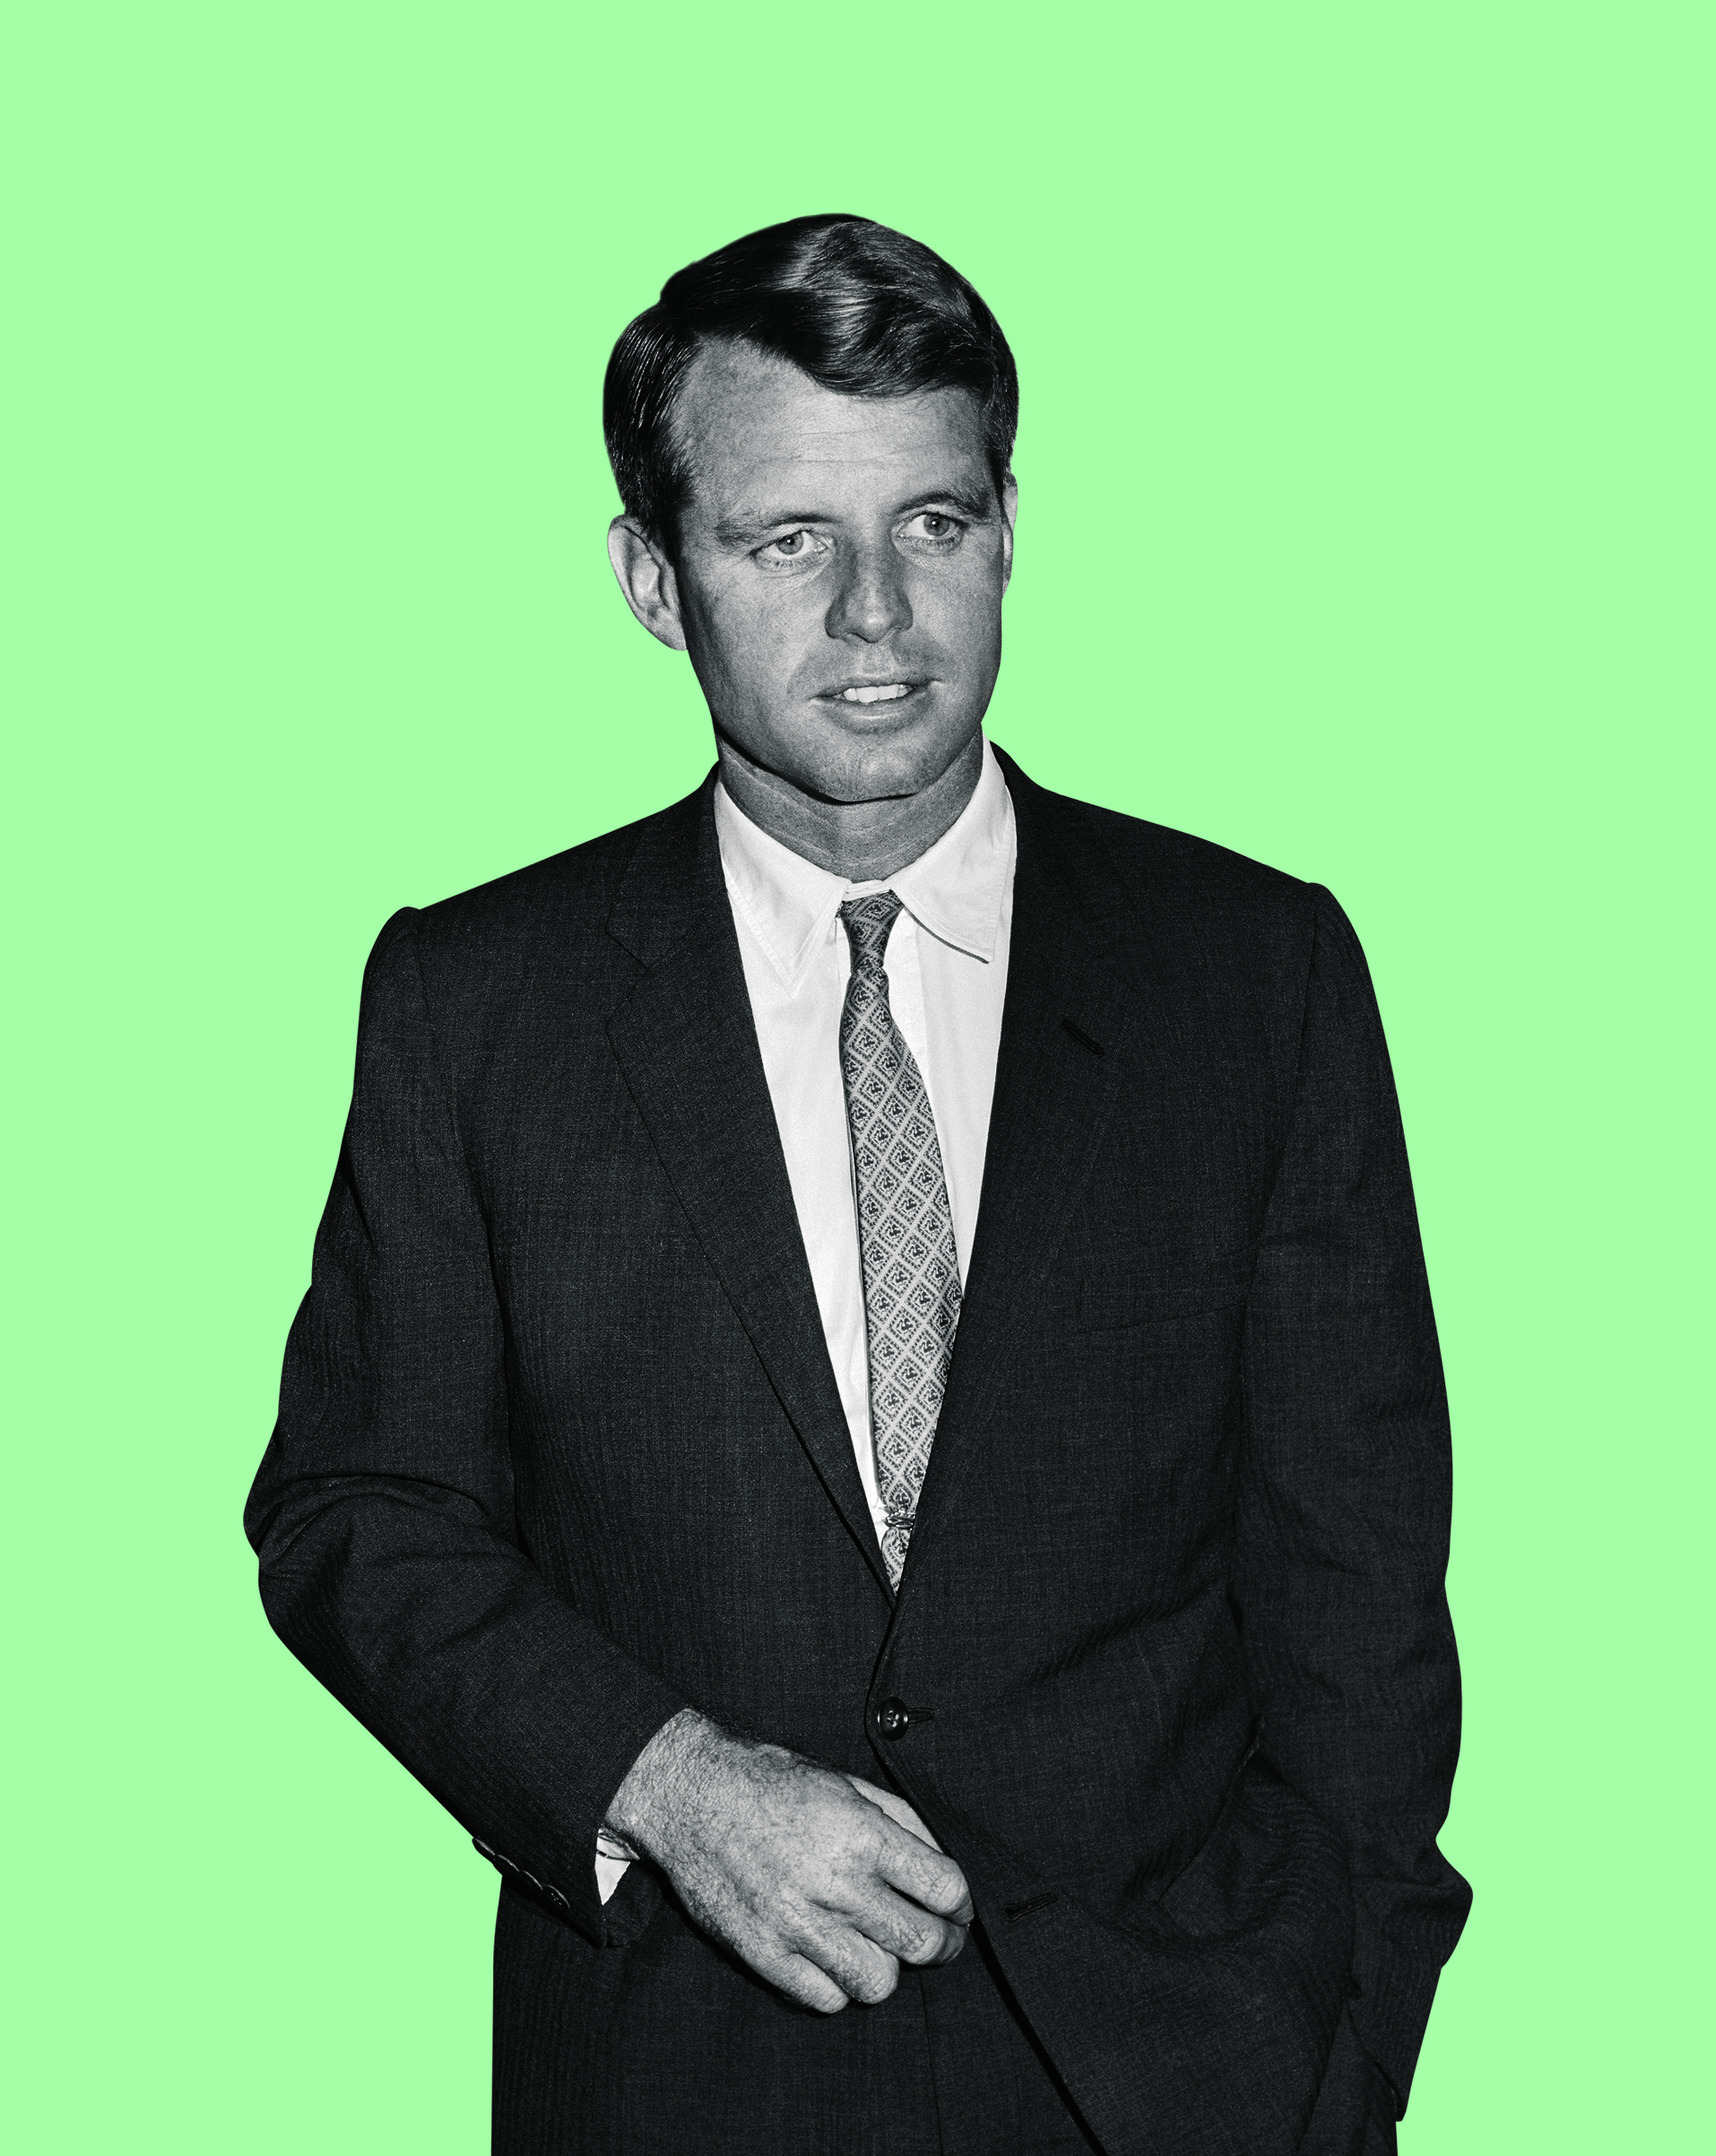 Robert Kennedy, brother of John F. Kennedy, attorney general and U.S. senator. (Bettmann Archive/Getty Images)